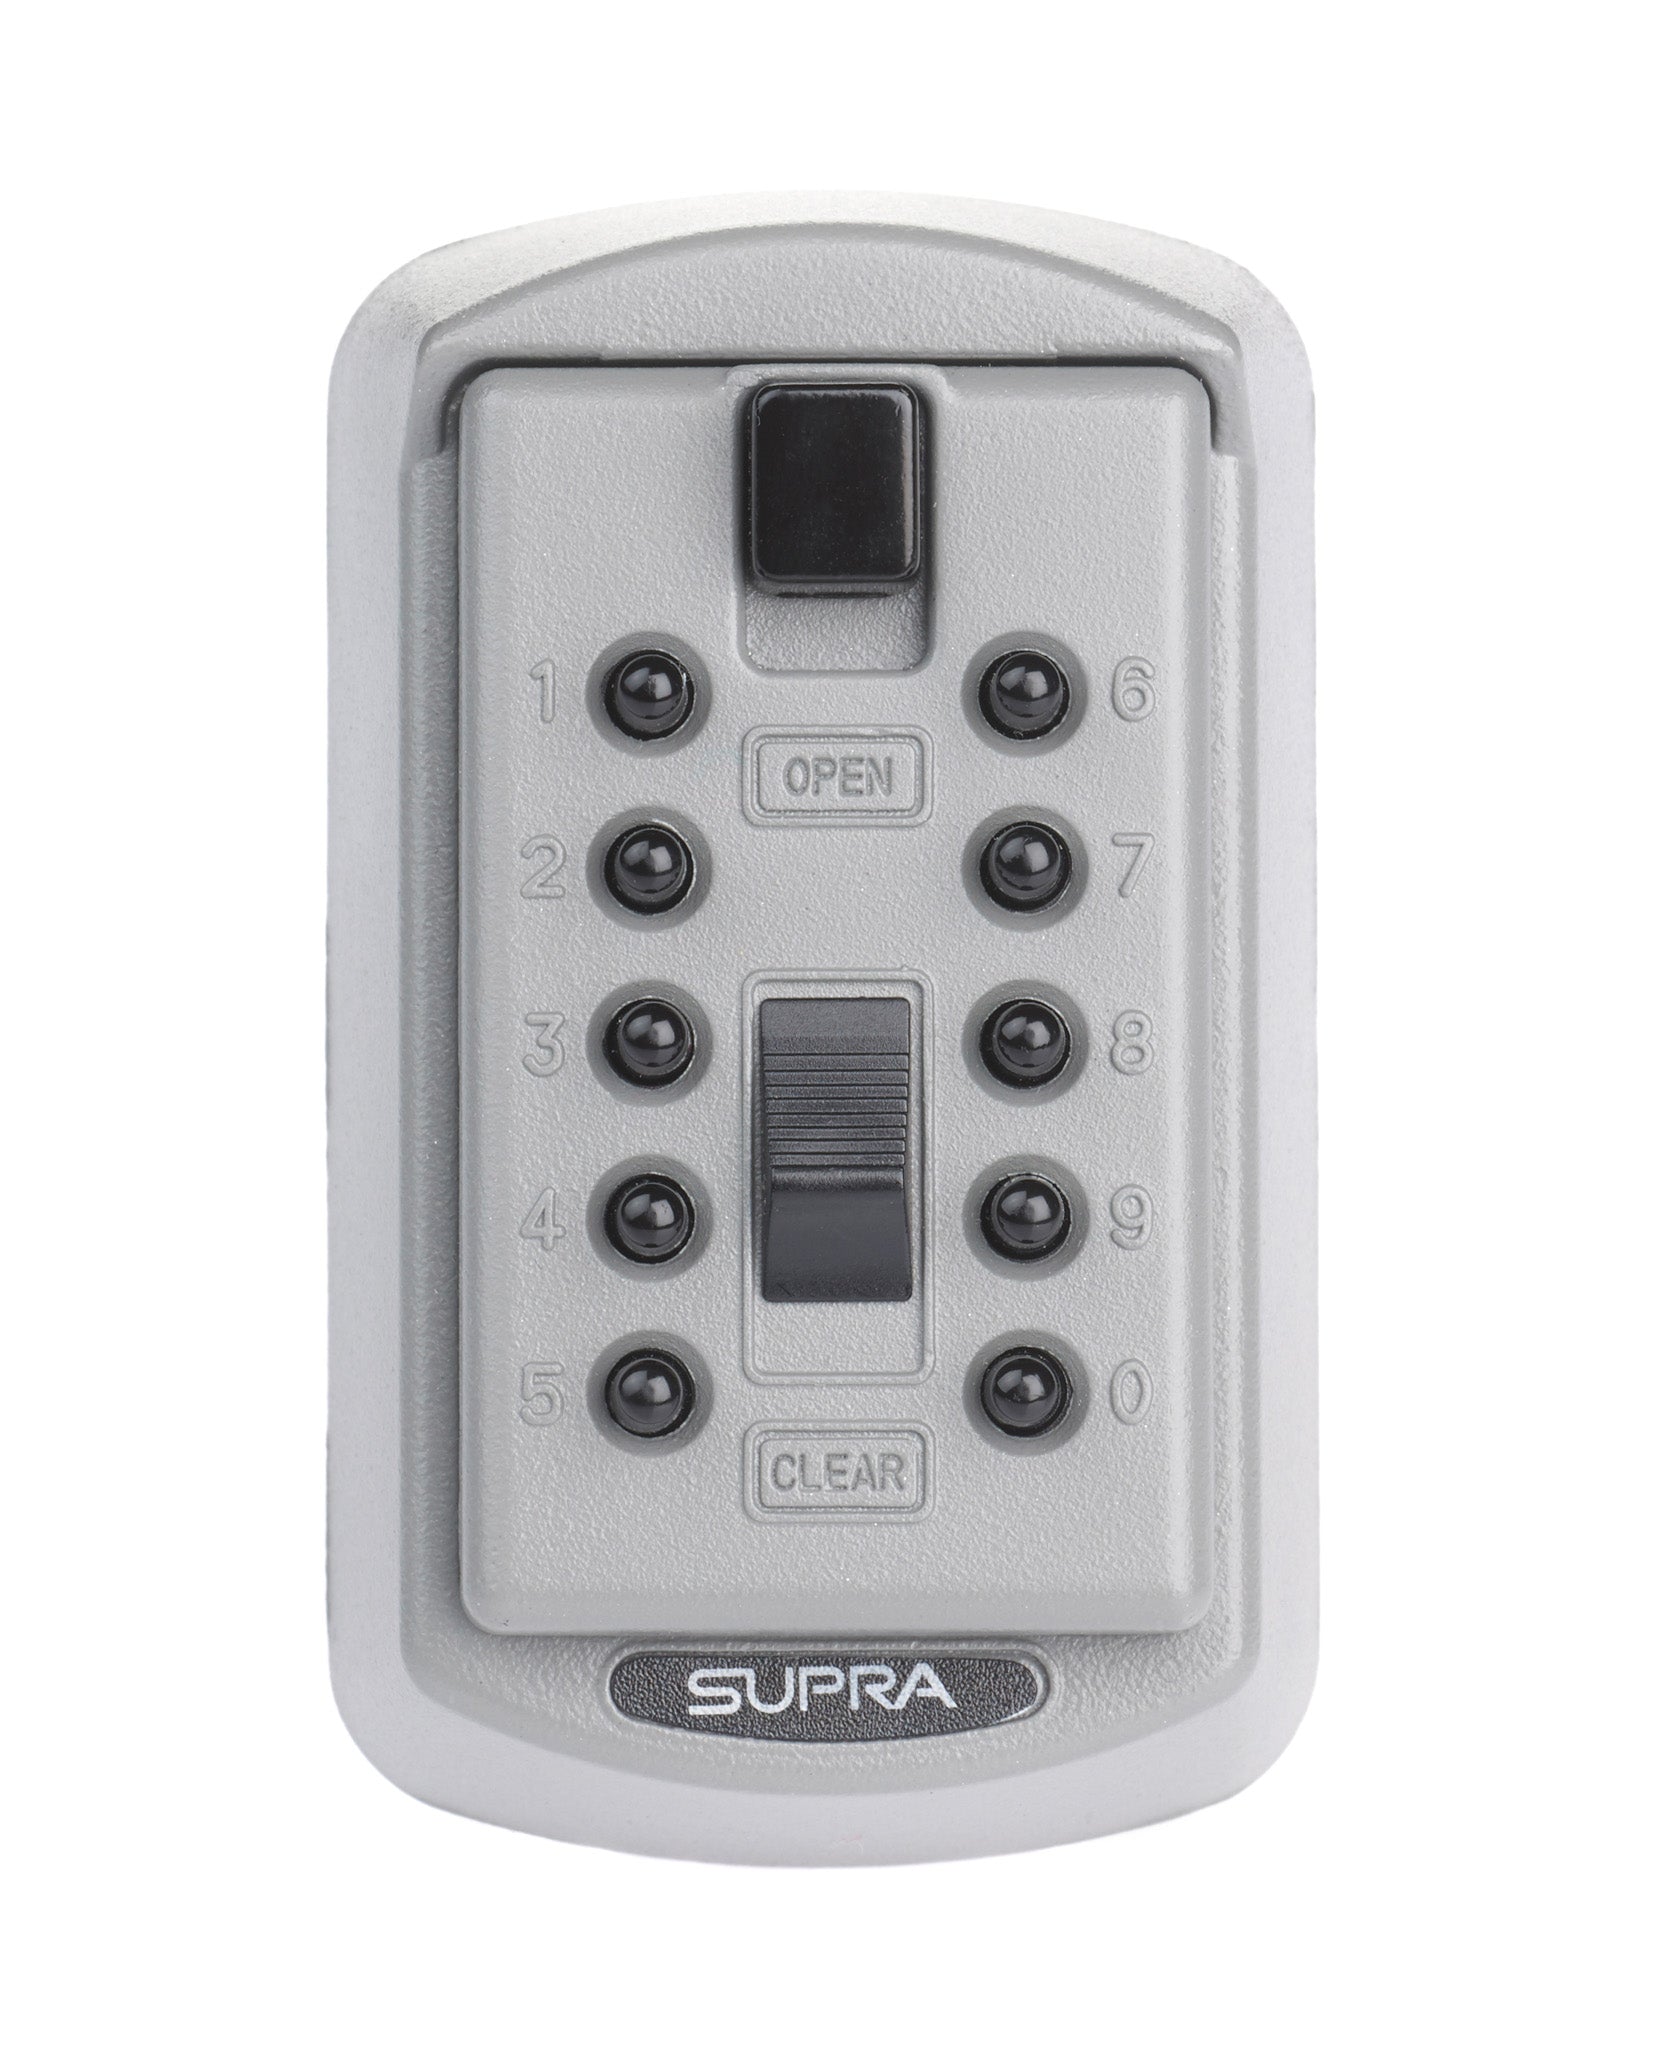 Close up of silver Supra S6 slimline key safe with digits 0-9 for code 